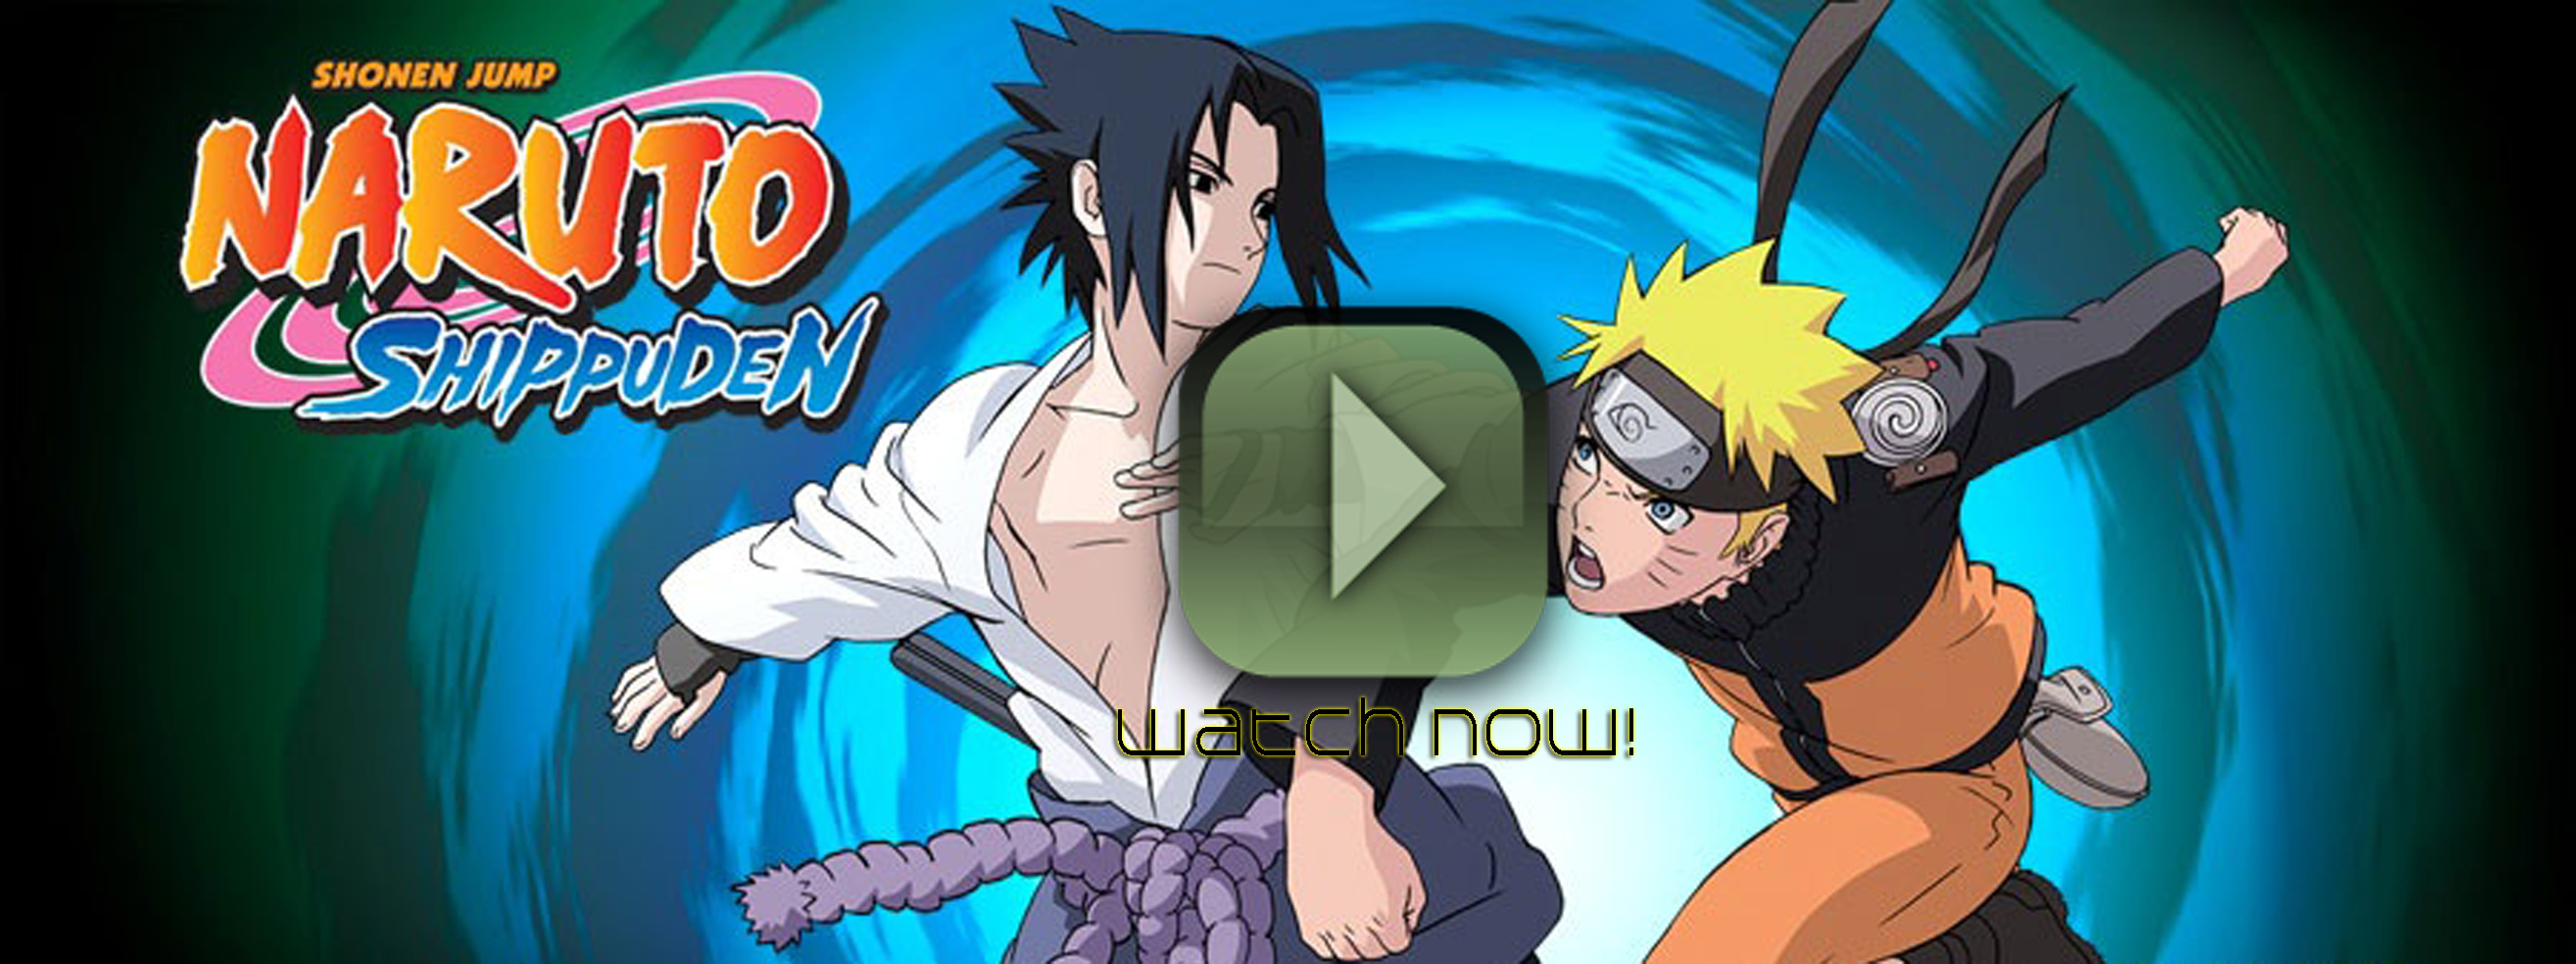 Naruto Shippuden English Dubbed Episodes Torrent Download